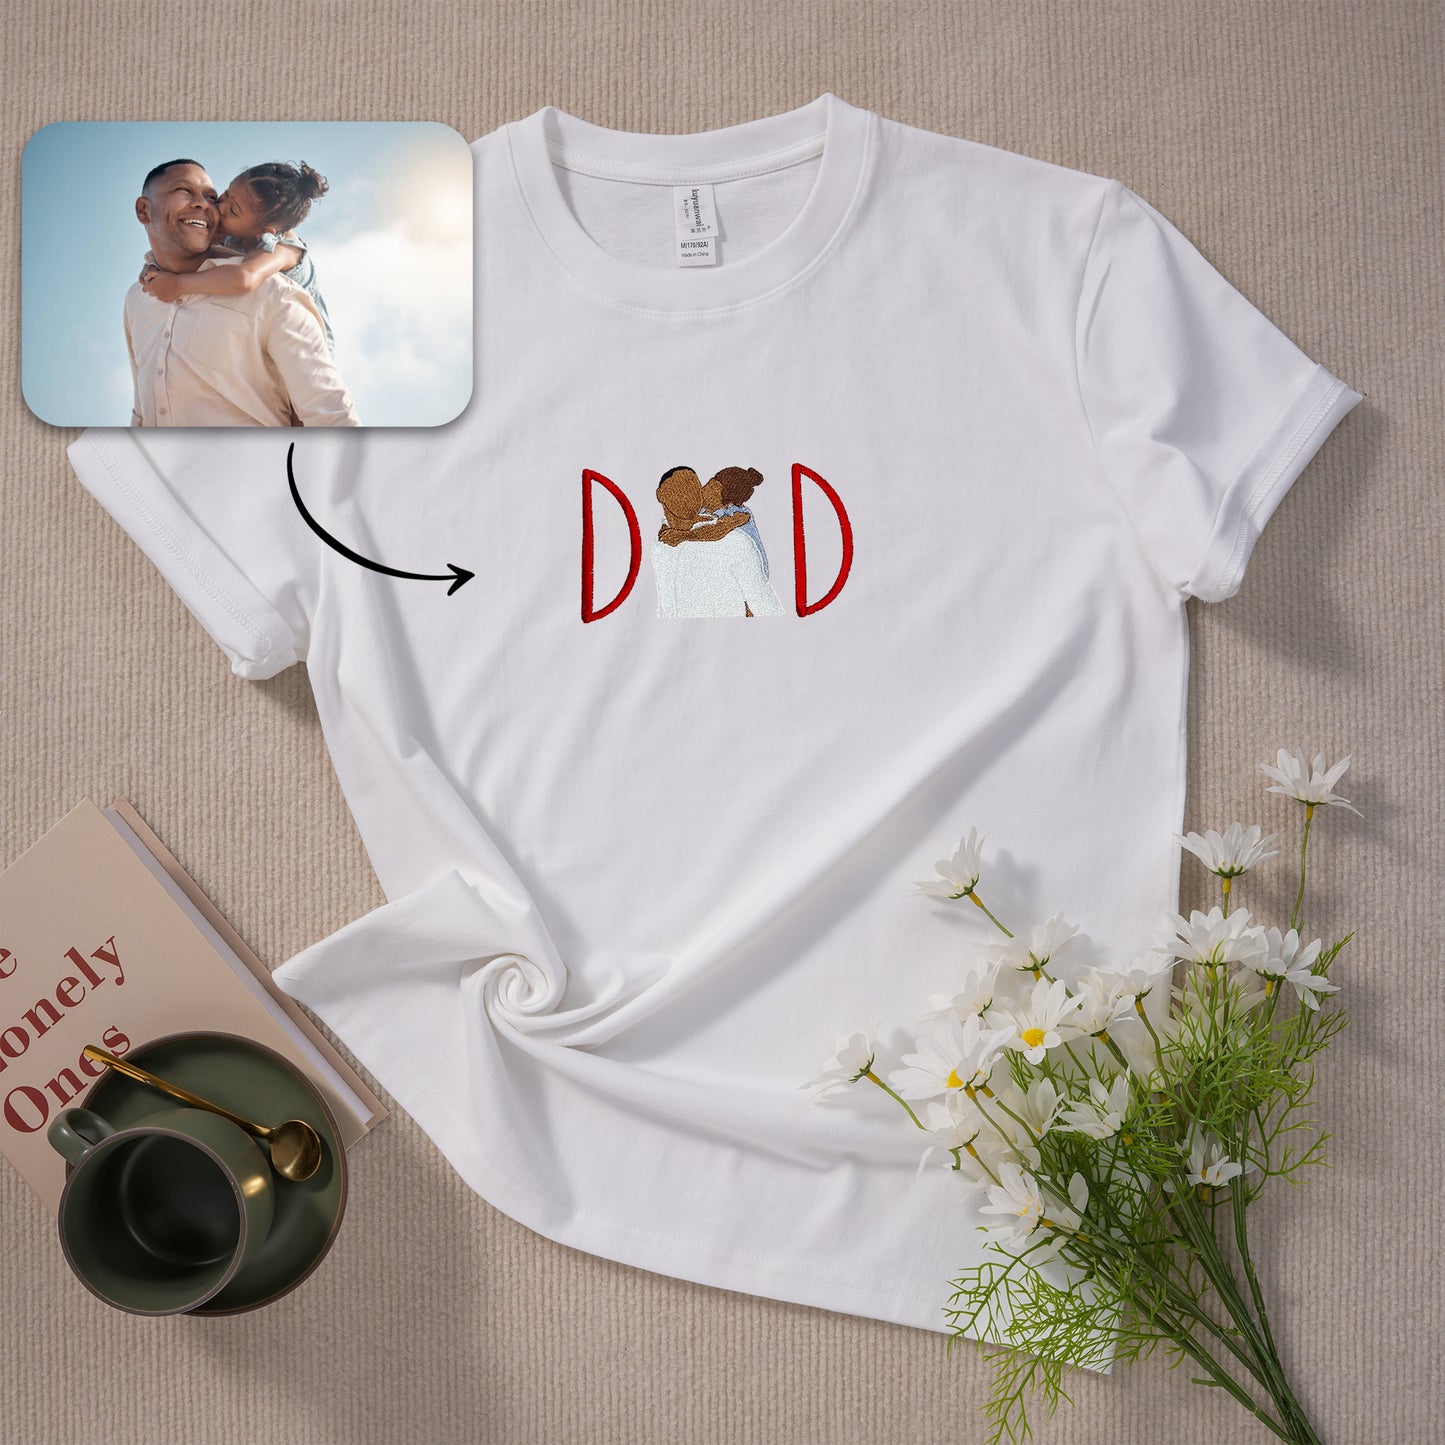 Personalized Dad Photo Embroidered T-Shirt Sweatshirt, Unique Father's Day Gift